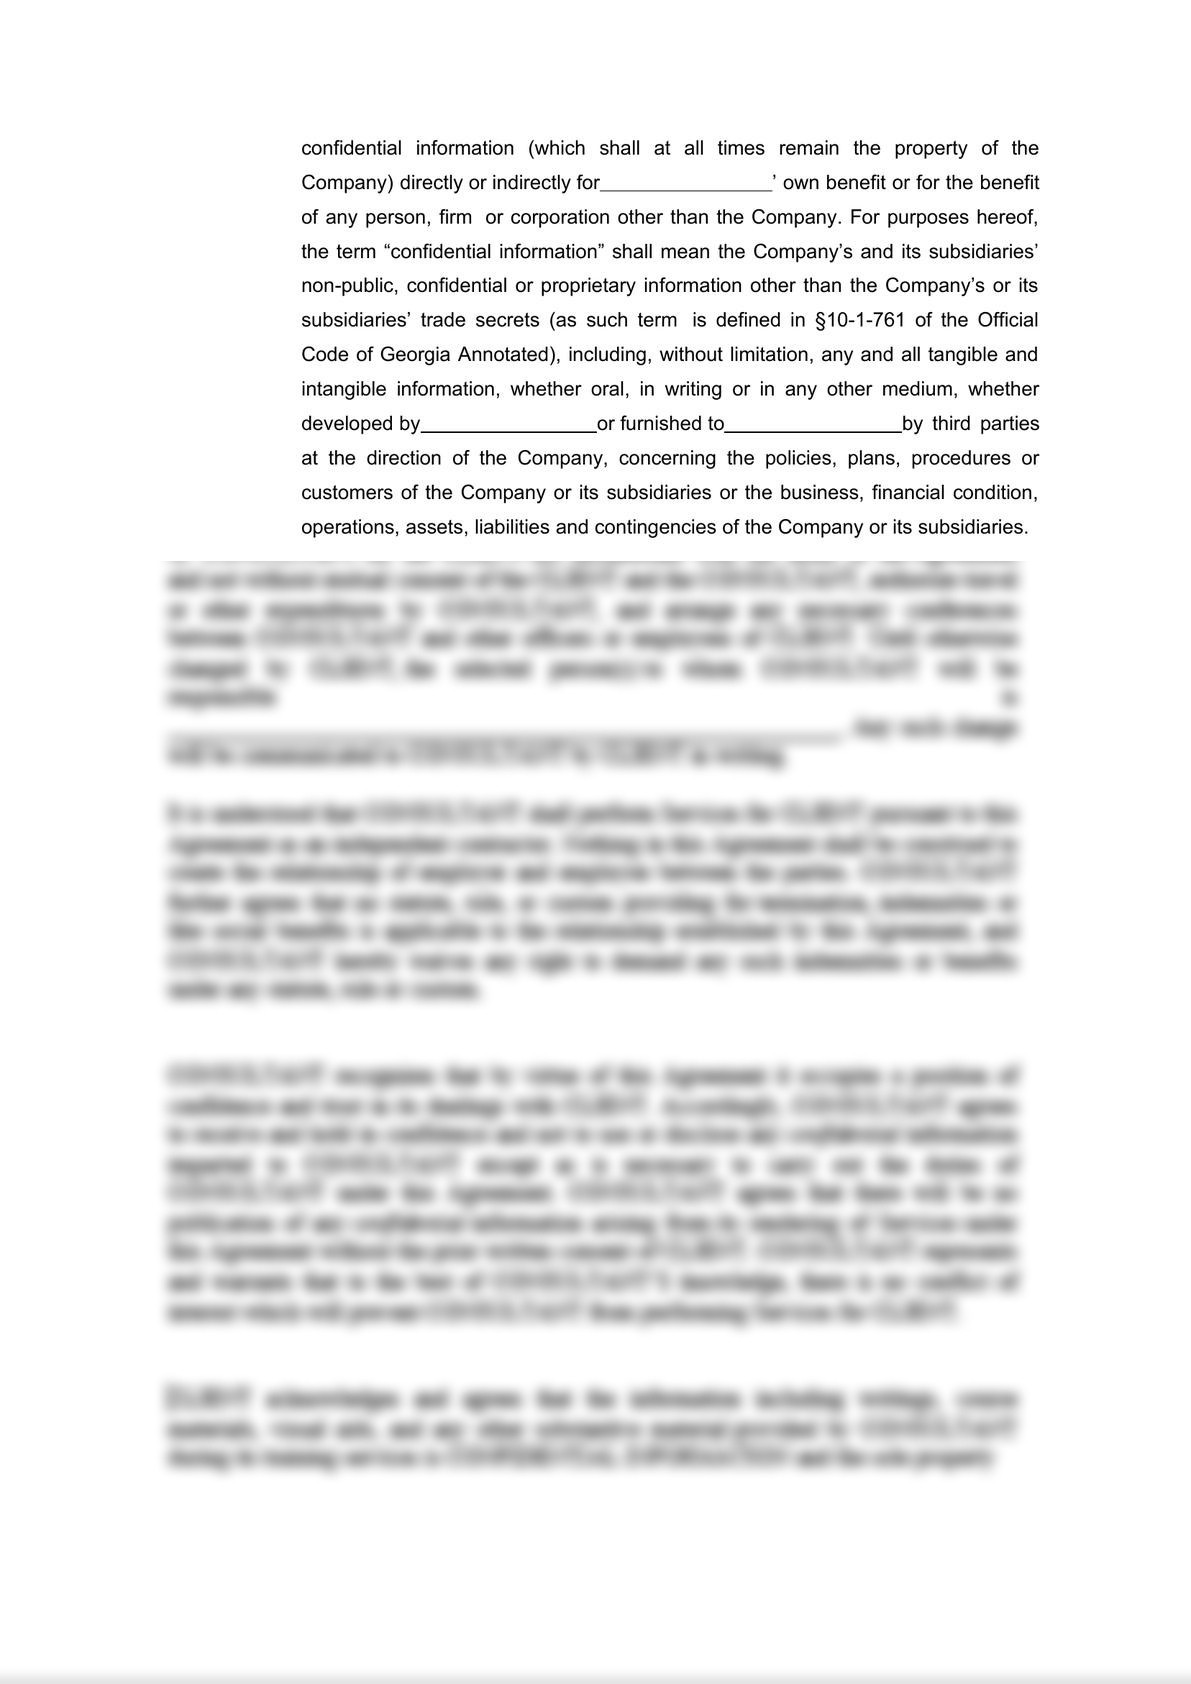 General Commission Agreement-5